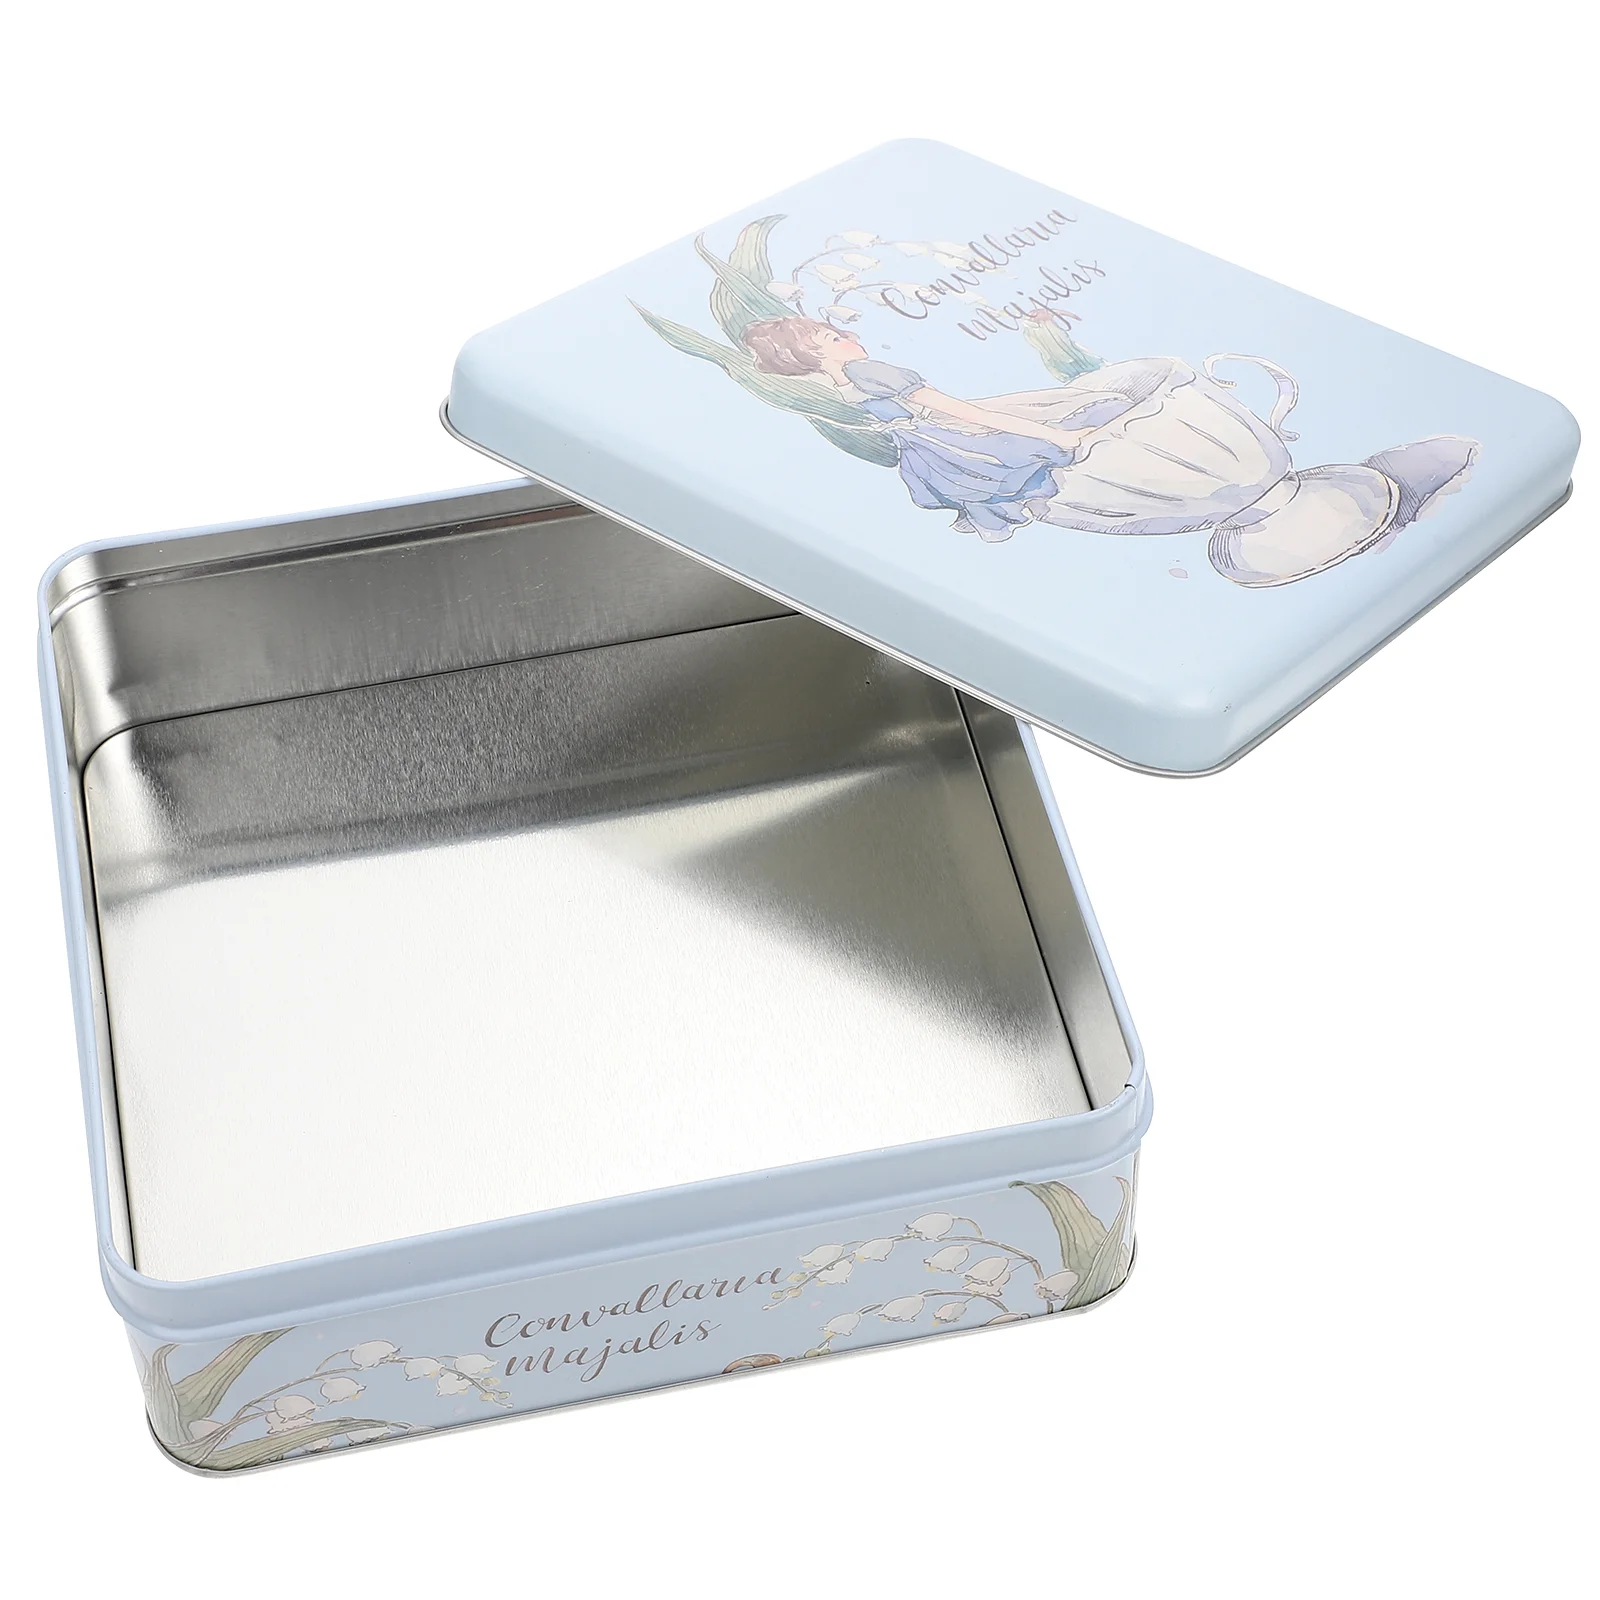 

Biscuit Tin Box Case Tinplate Cookie Large Makeup Storage Organizer Candy Iron Packing Jewelry